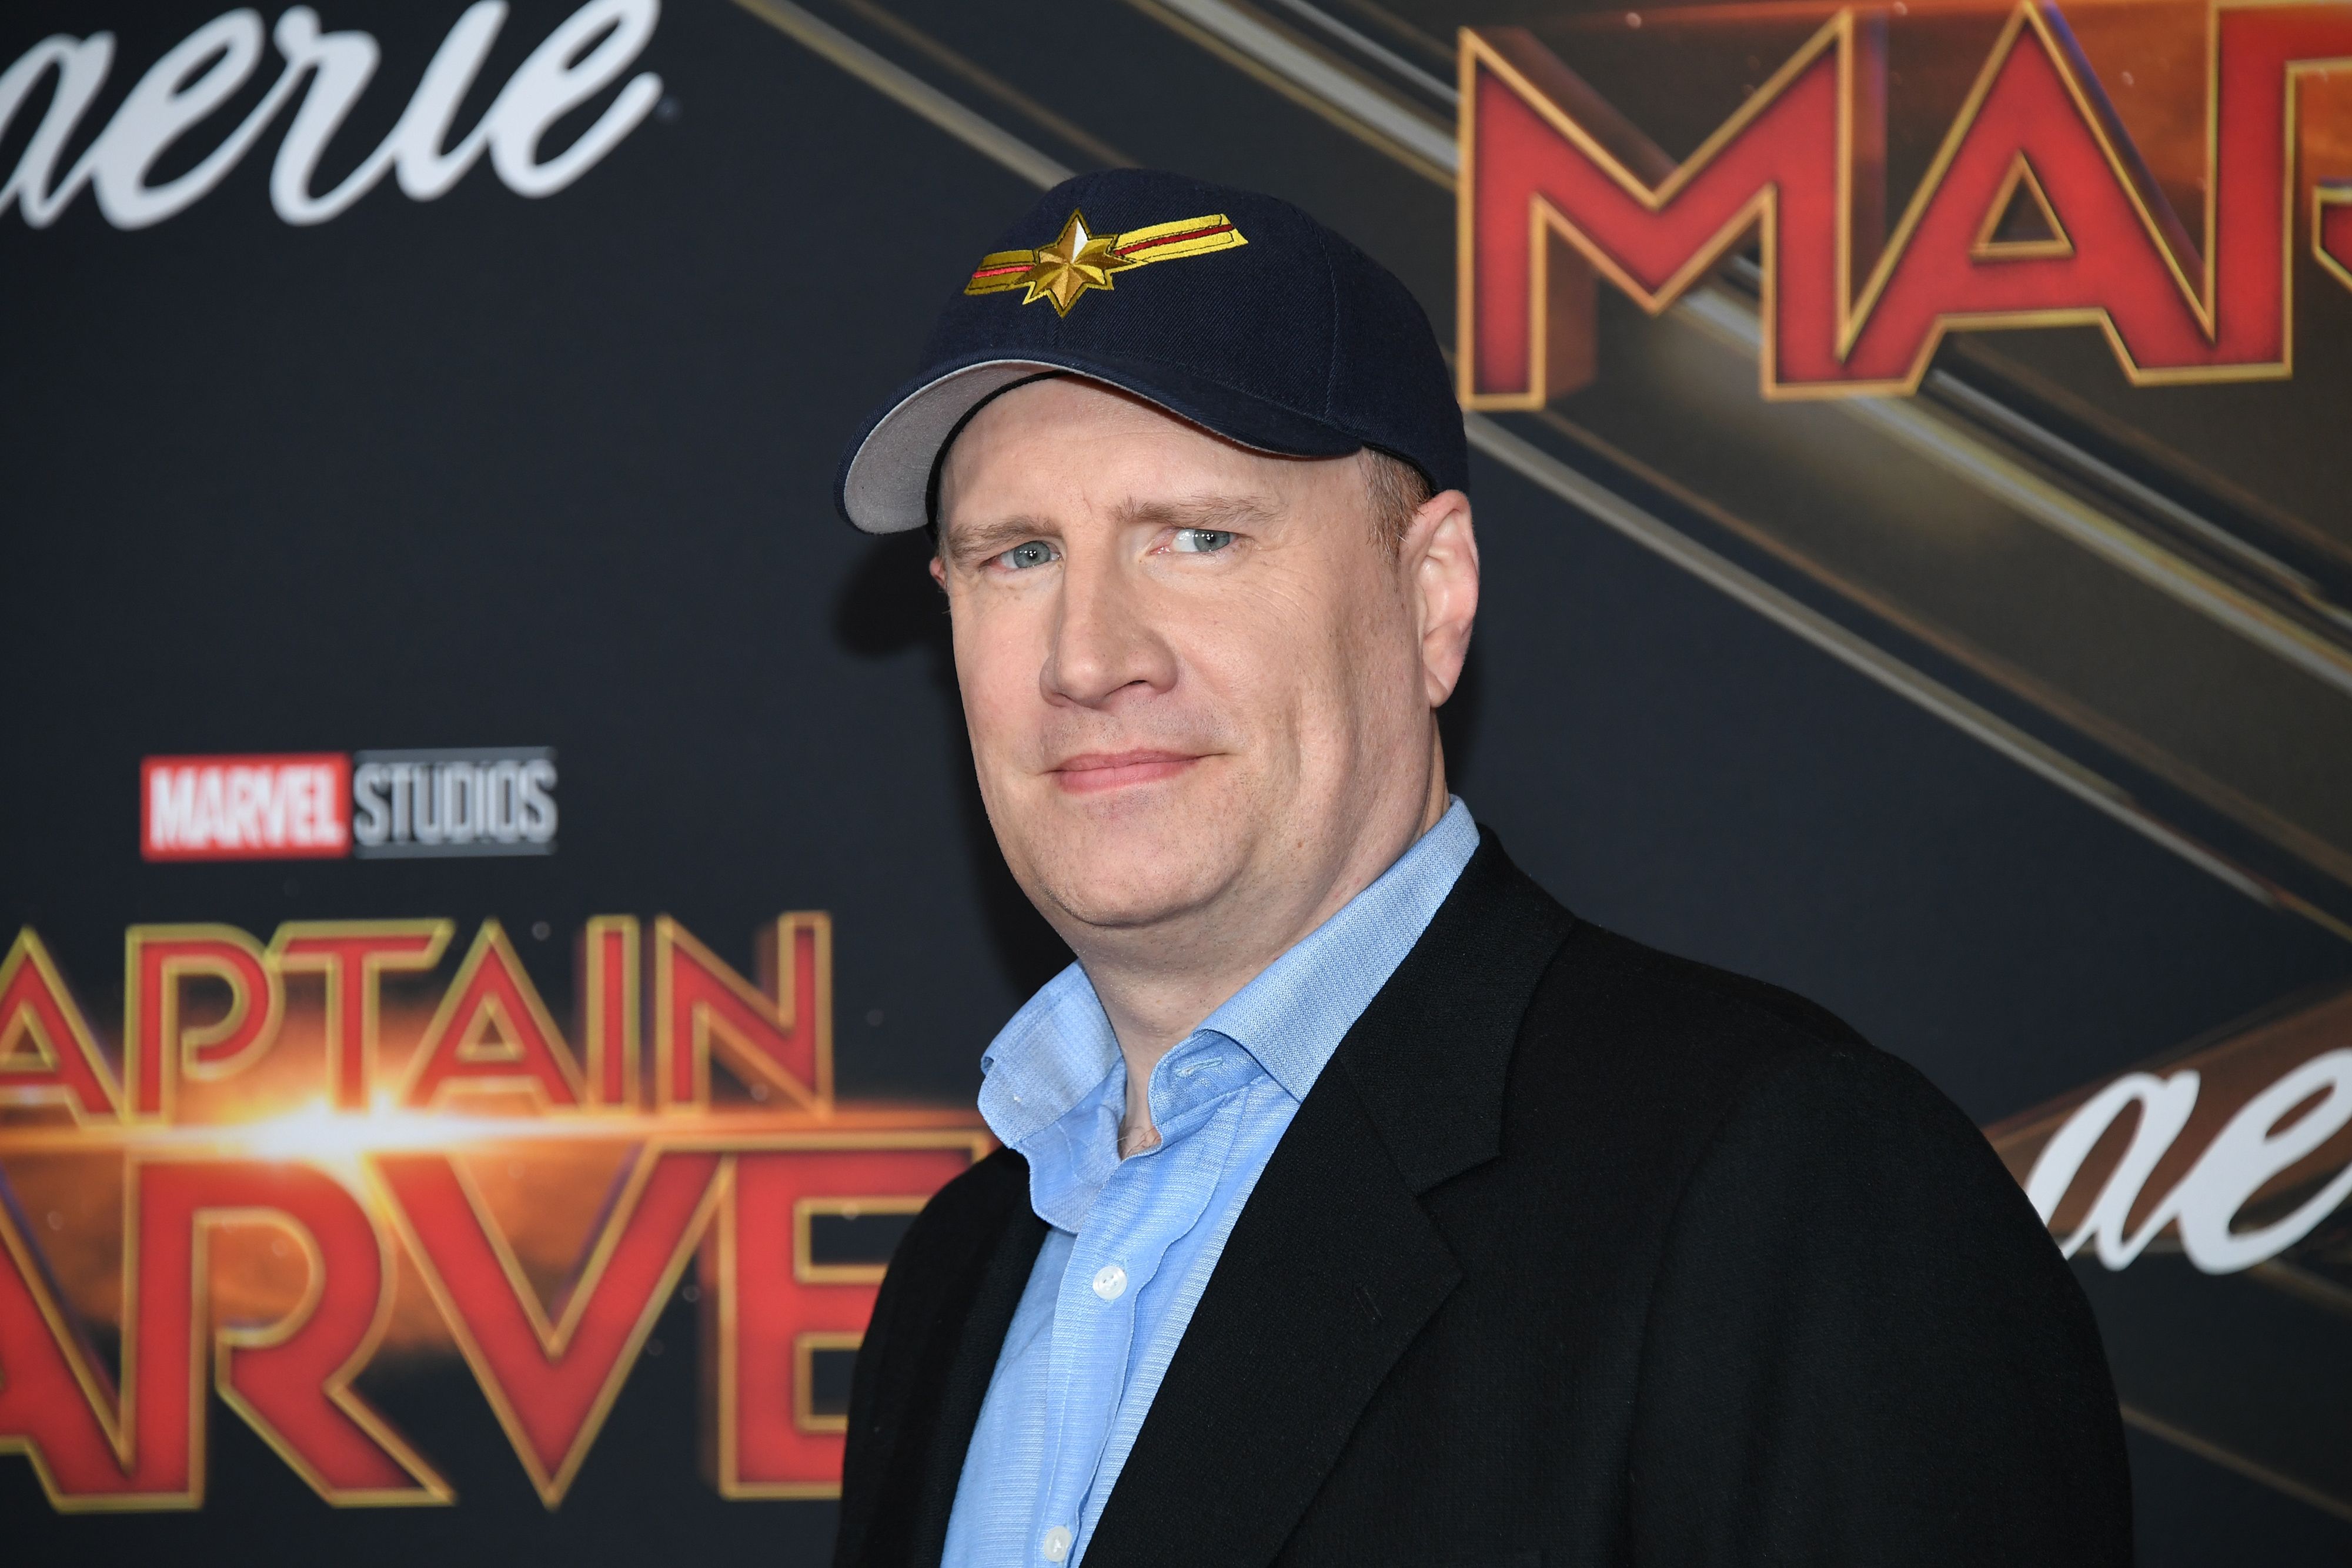 US producer Kevin Feige attends the world premiere of "Captain Marvel" in Hollywood, California, on March 4, 2019.